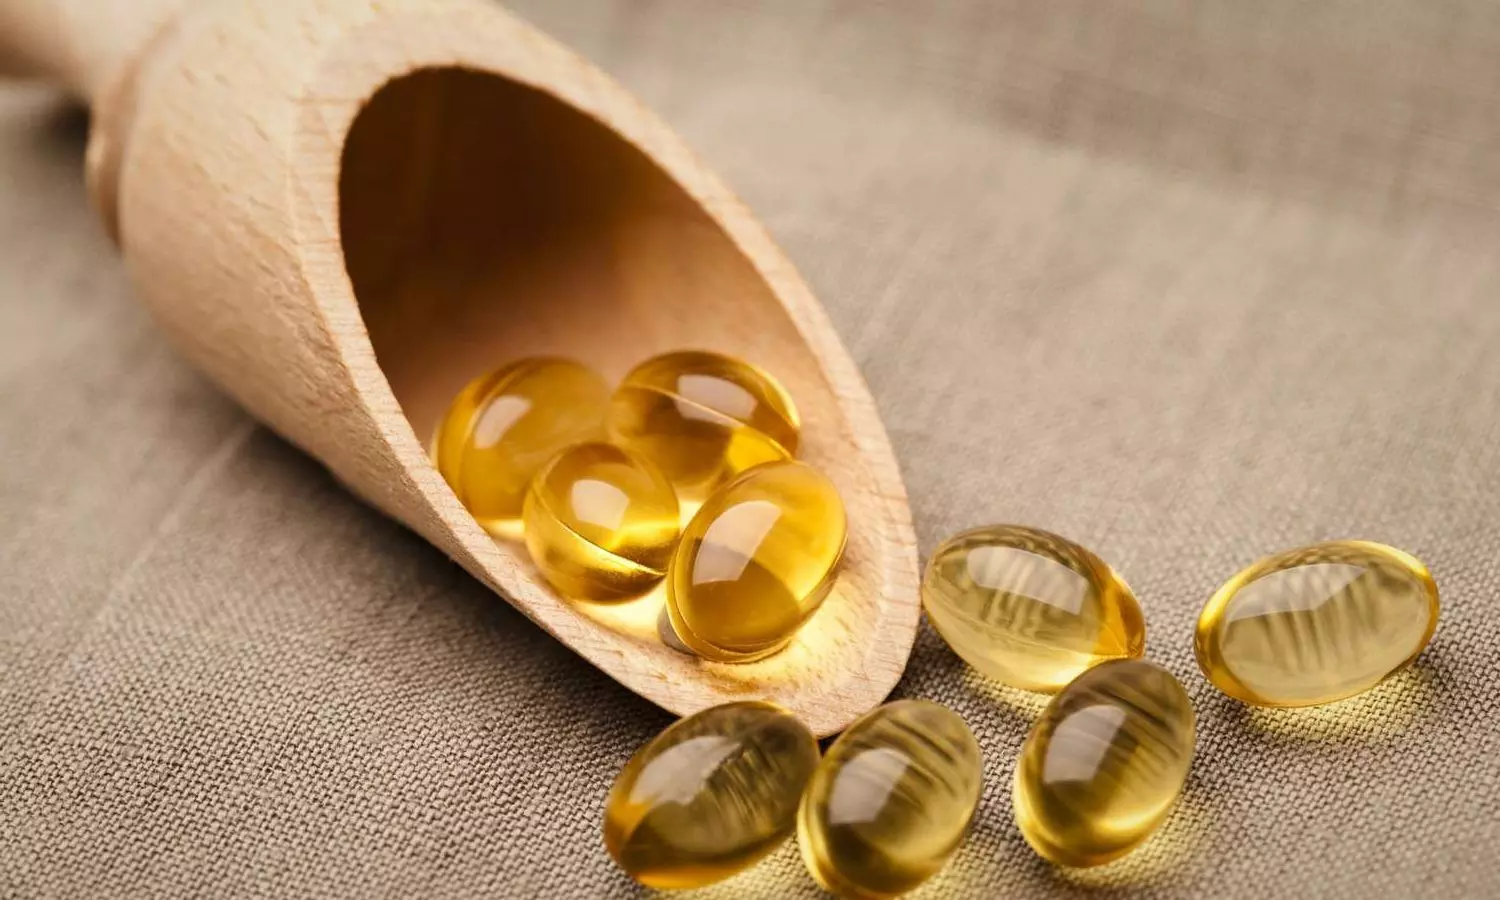 Vitamin E beneficial for patients with polycystic ovary syndrome: Study